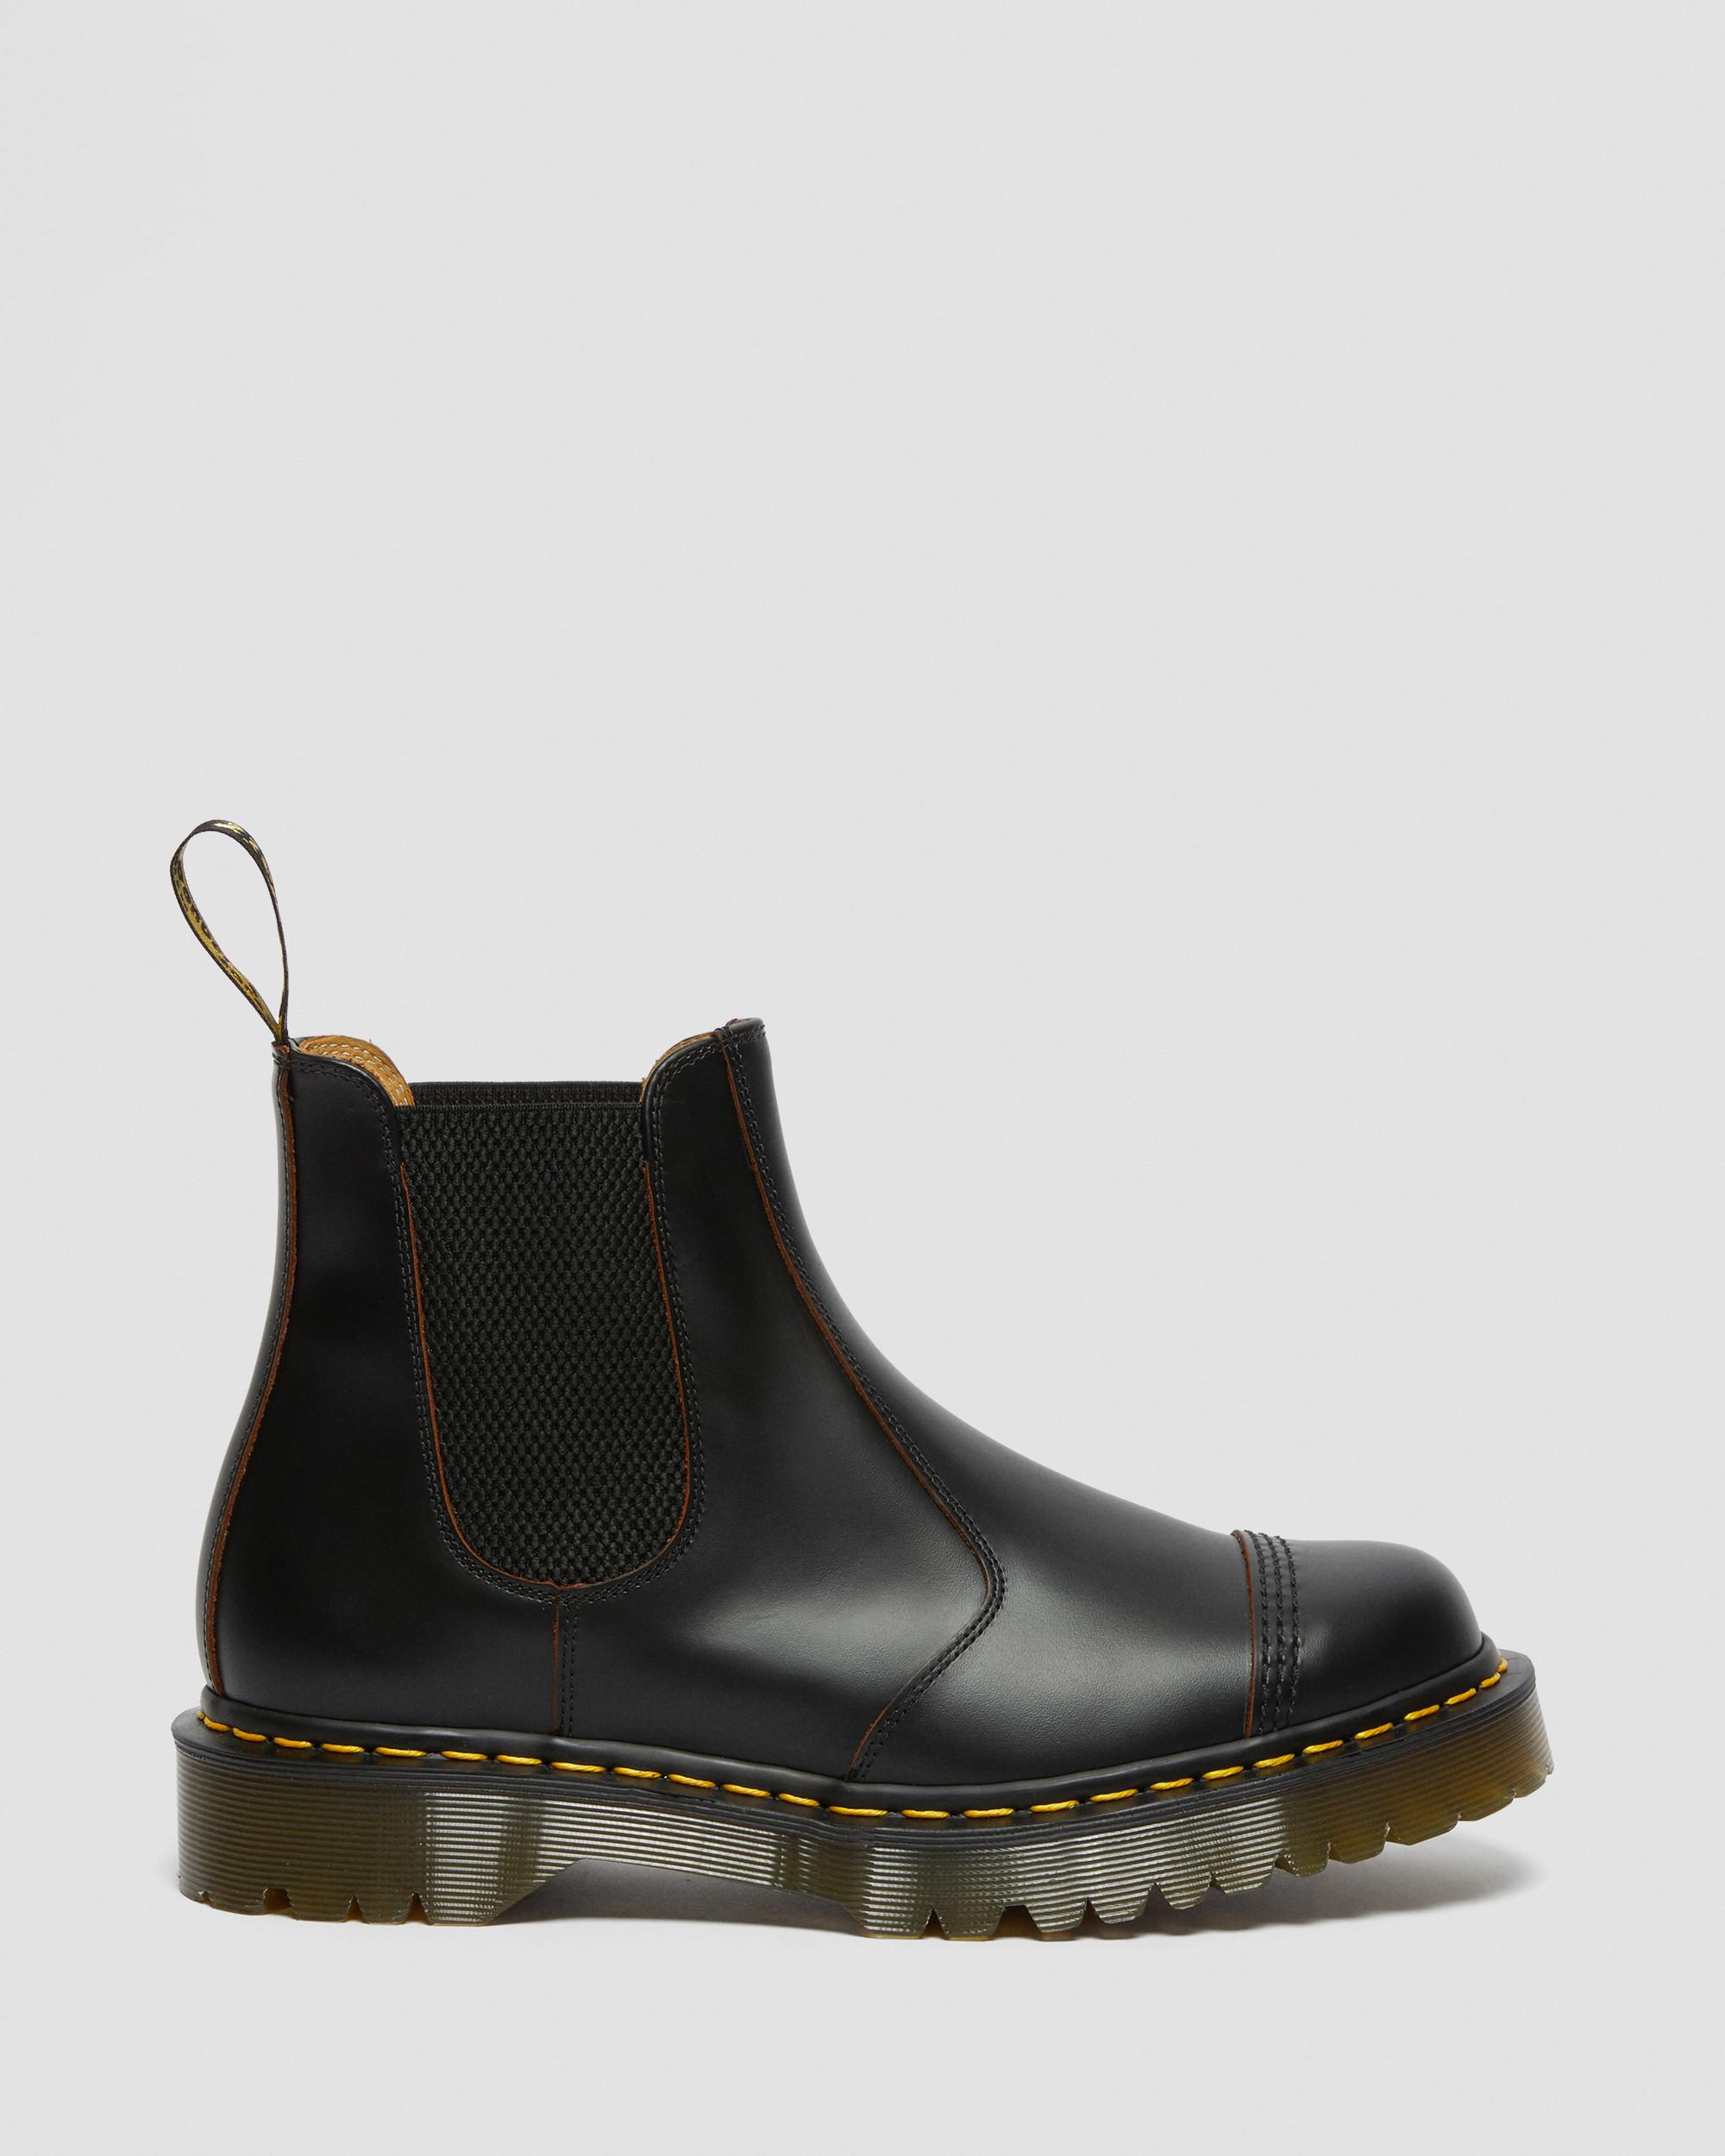 DR MARTENS 2976 Bex Made in England Toe Cap Chelsea Boots